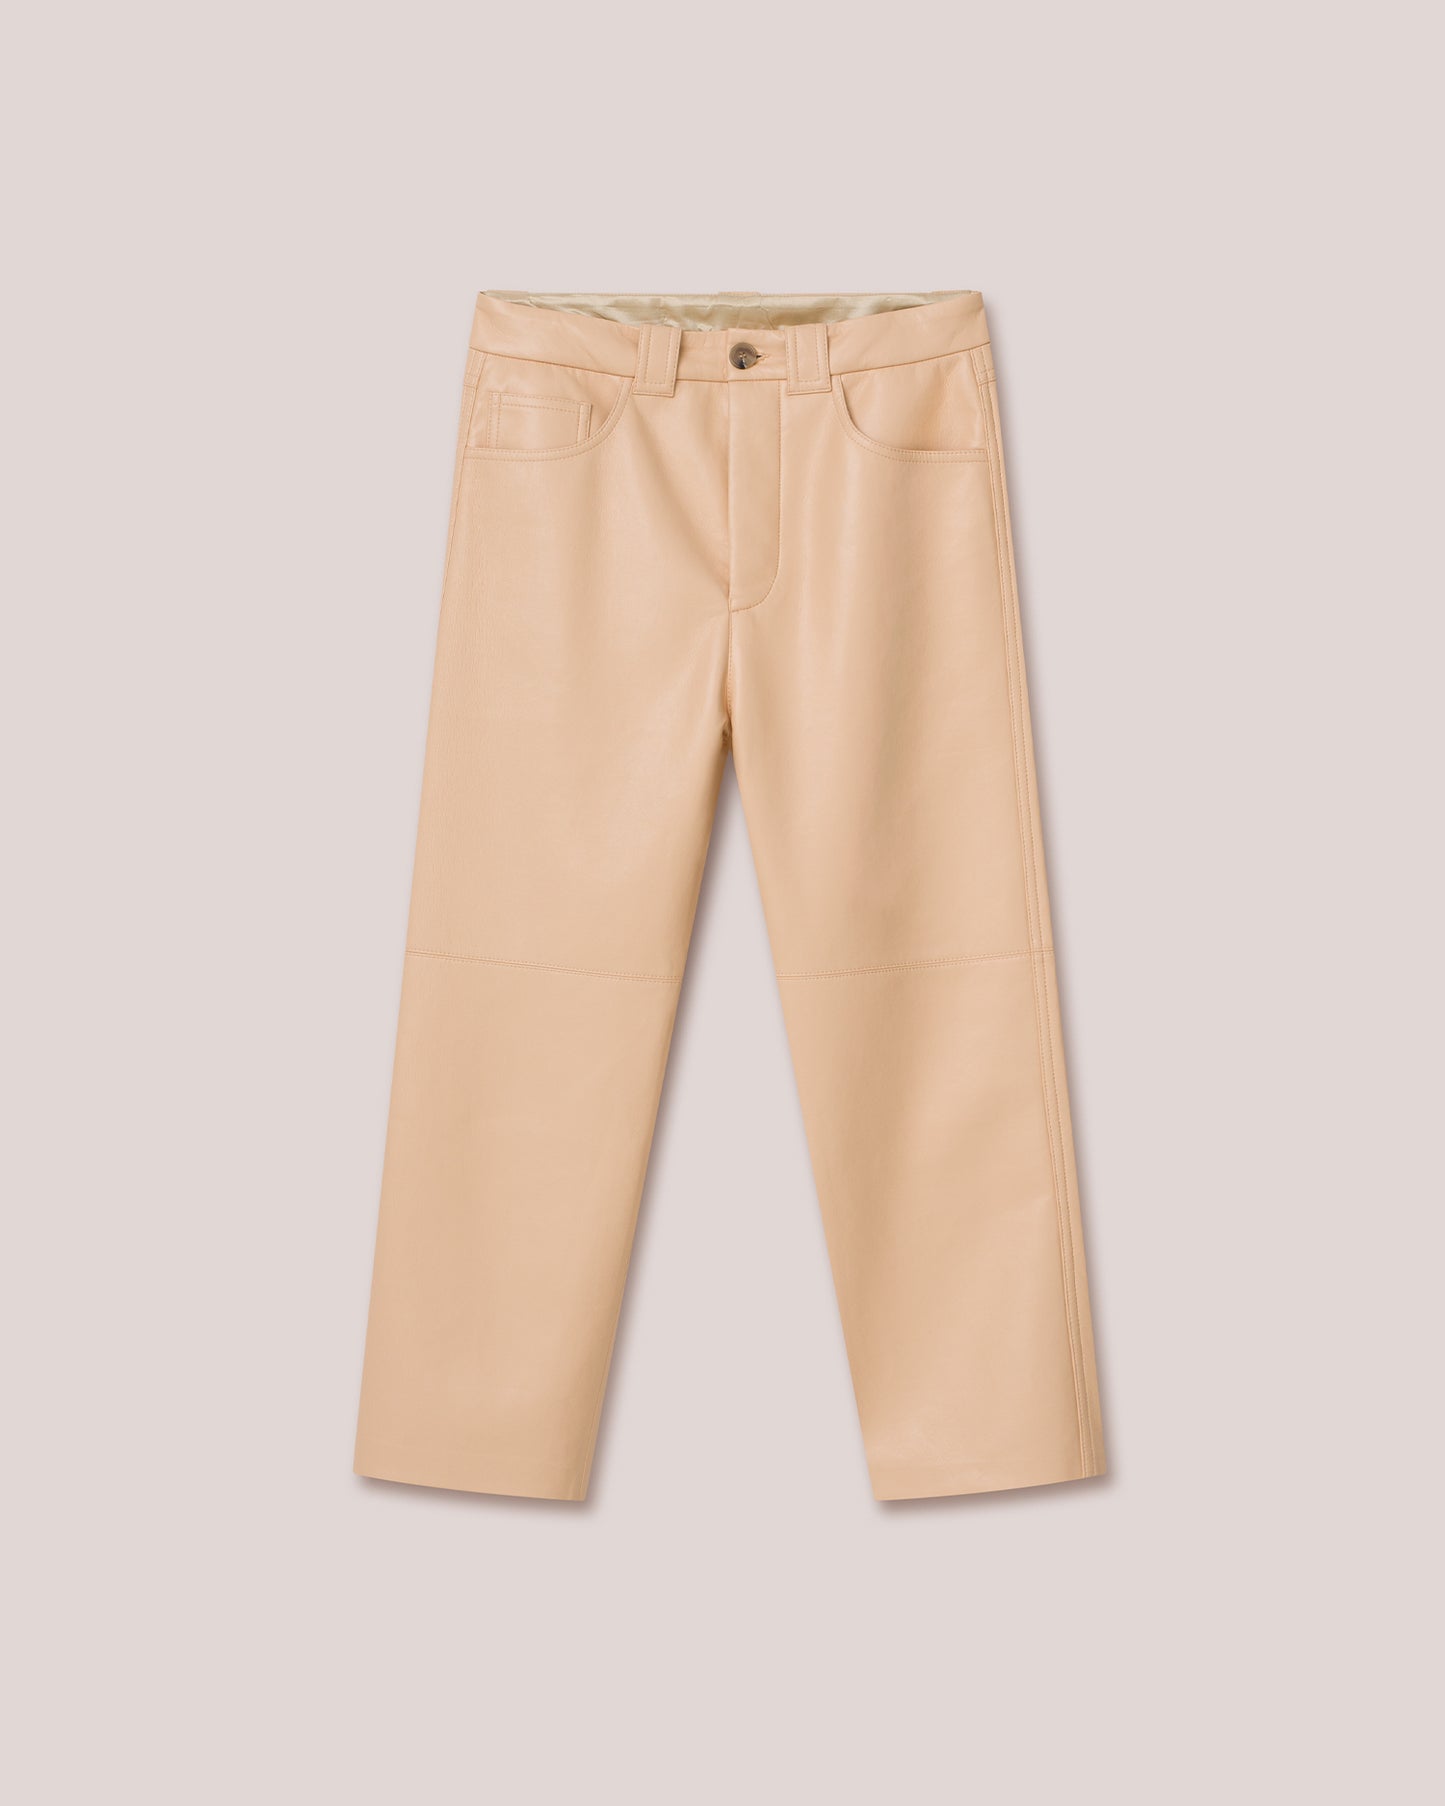 Nor - Archive Regenerated Leather Pants - Peach